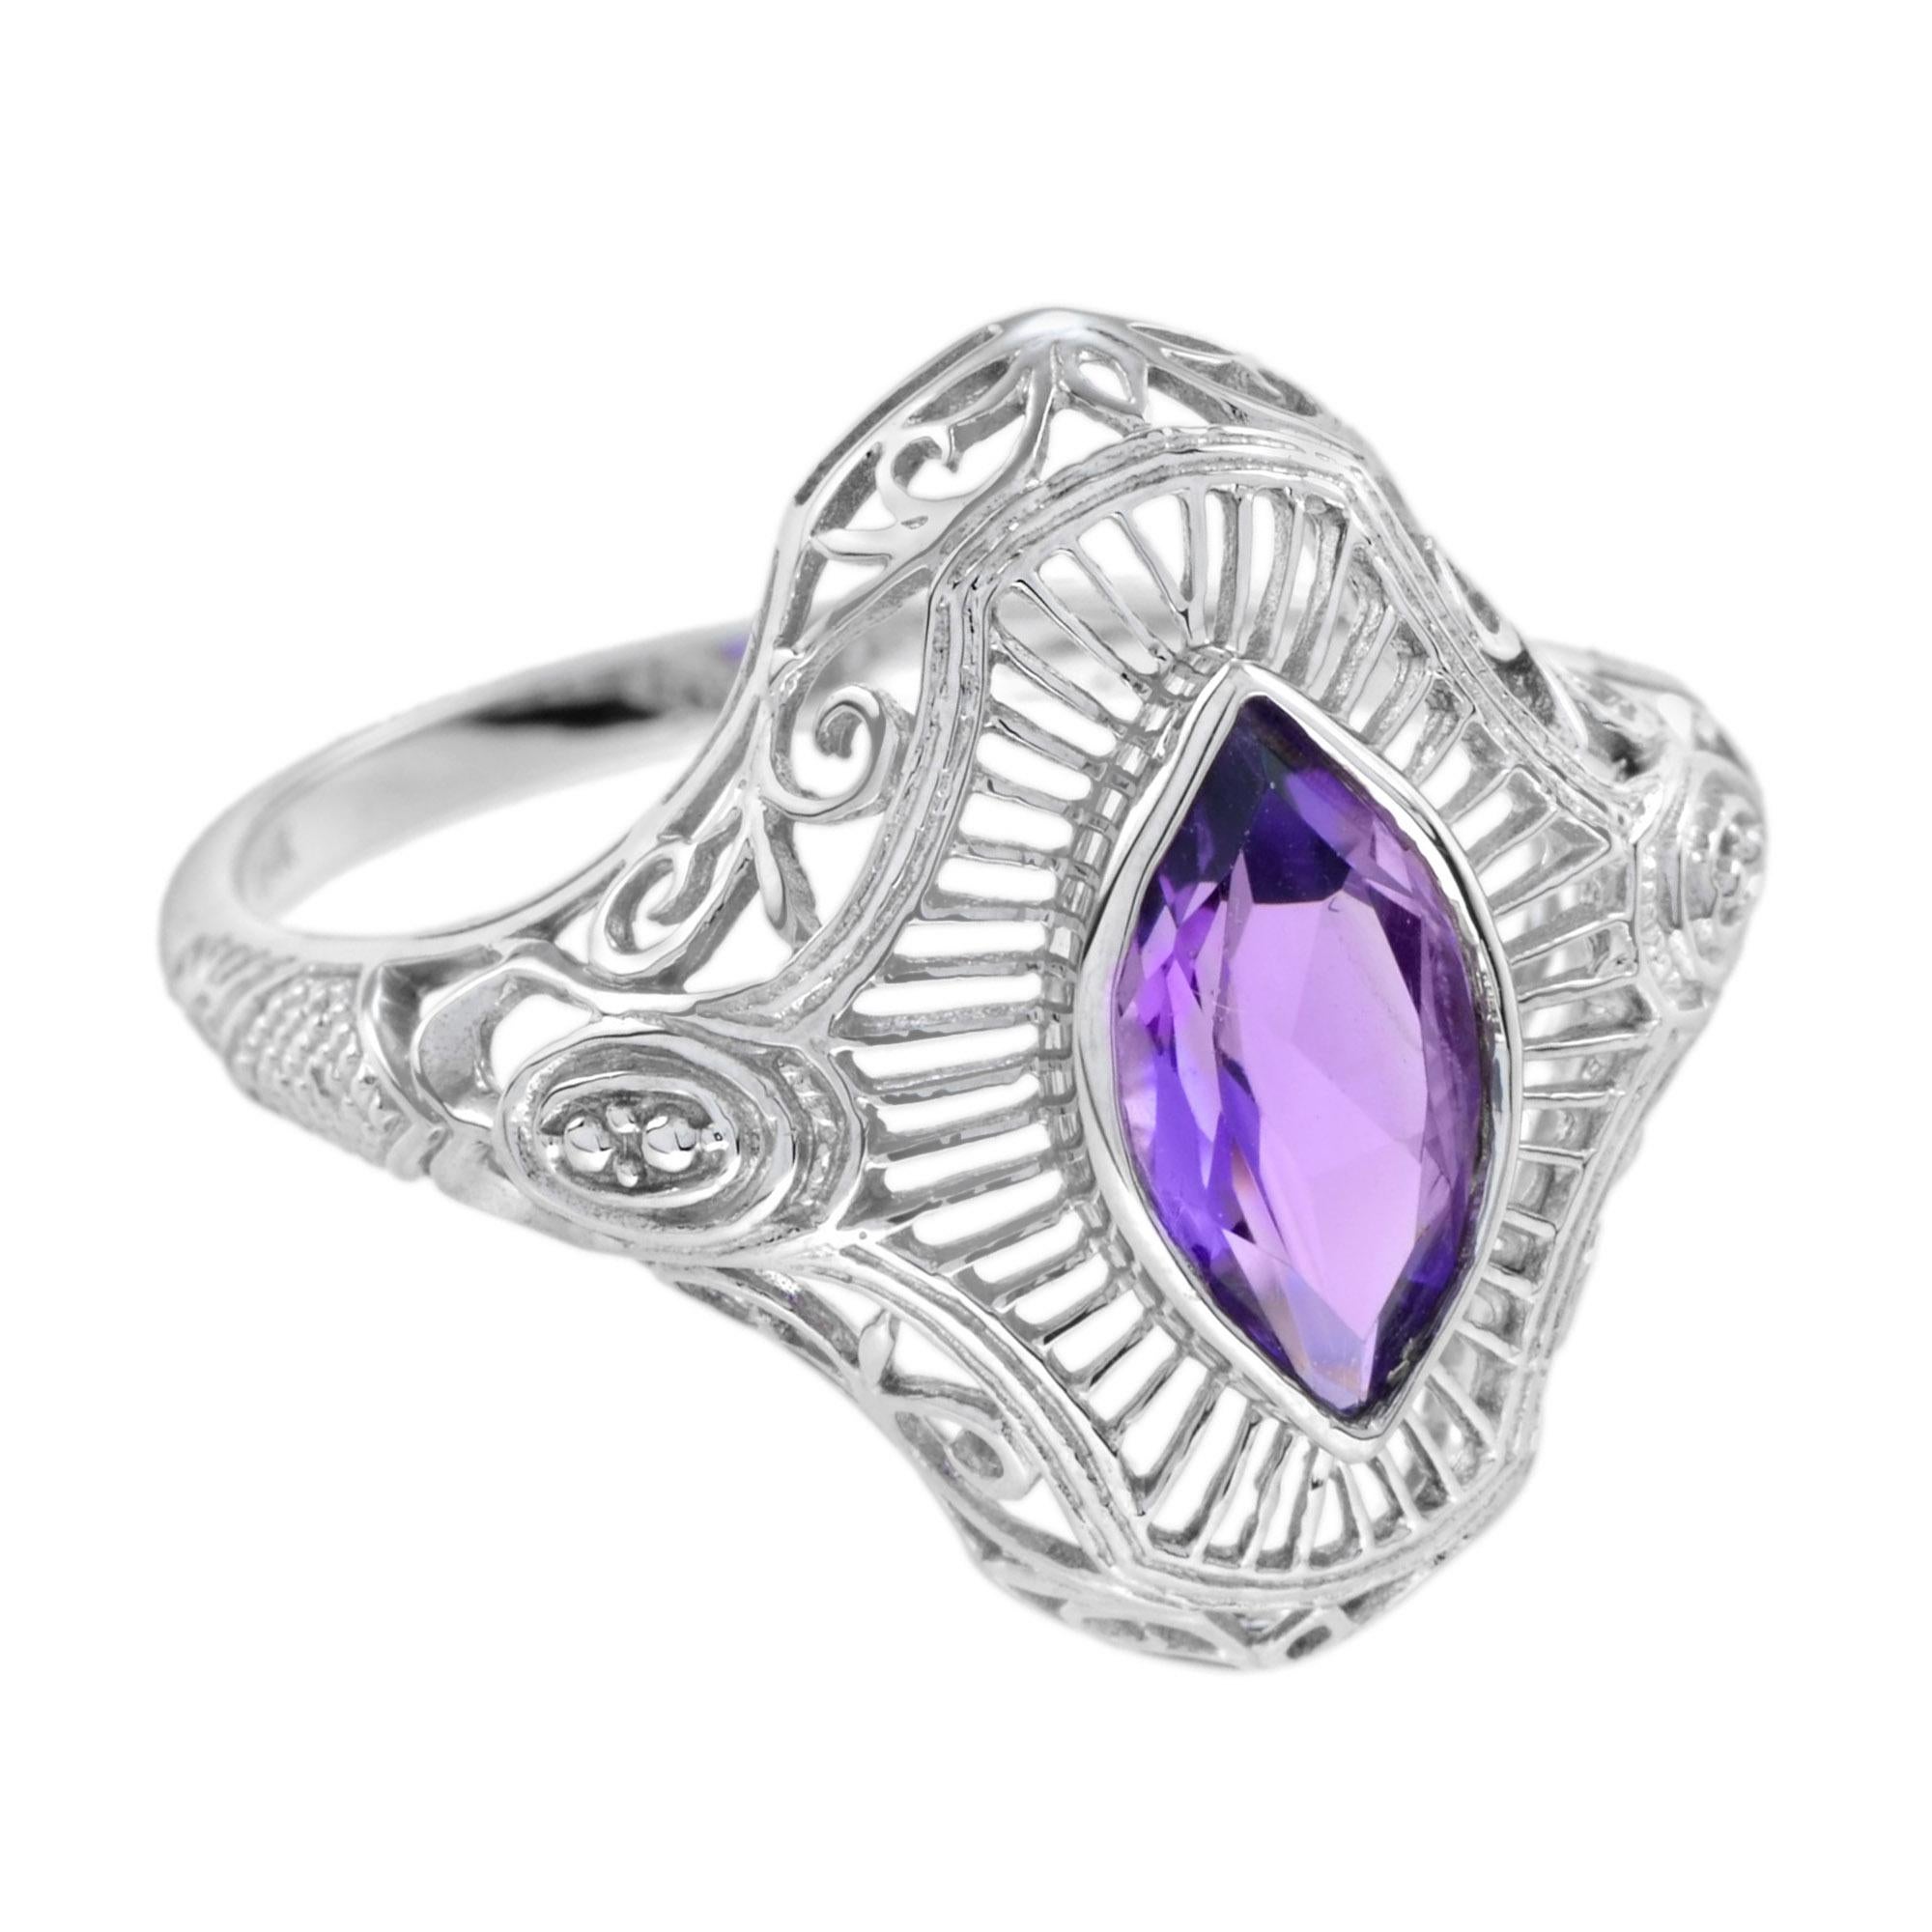 Majestic in its vintage design, the ring is a work of art itself. The marquise amethyst and filigree design are of remarkable detail, casting a beautiful aged beauty. Cut in a marquise shape, the main gemstone creates an illusion of greater size,